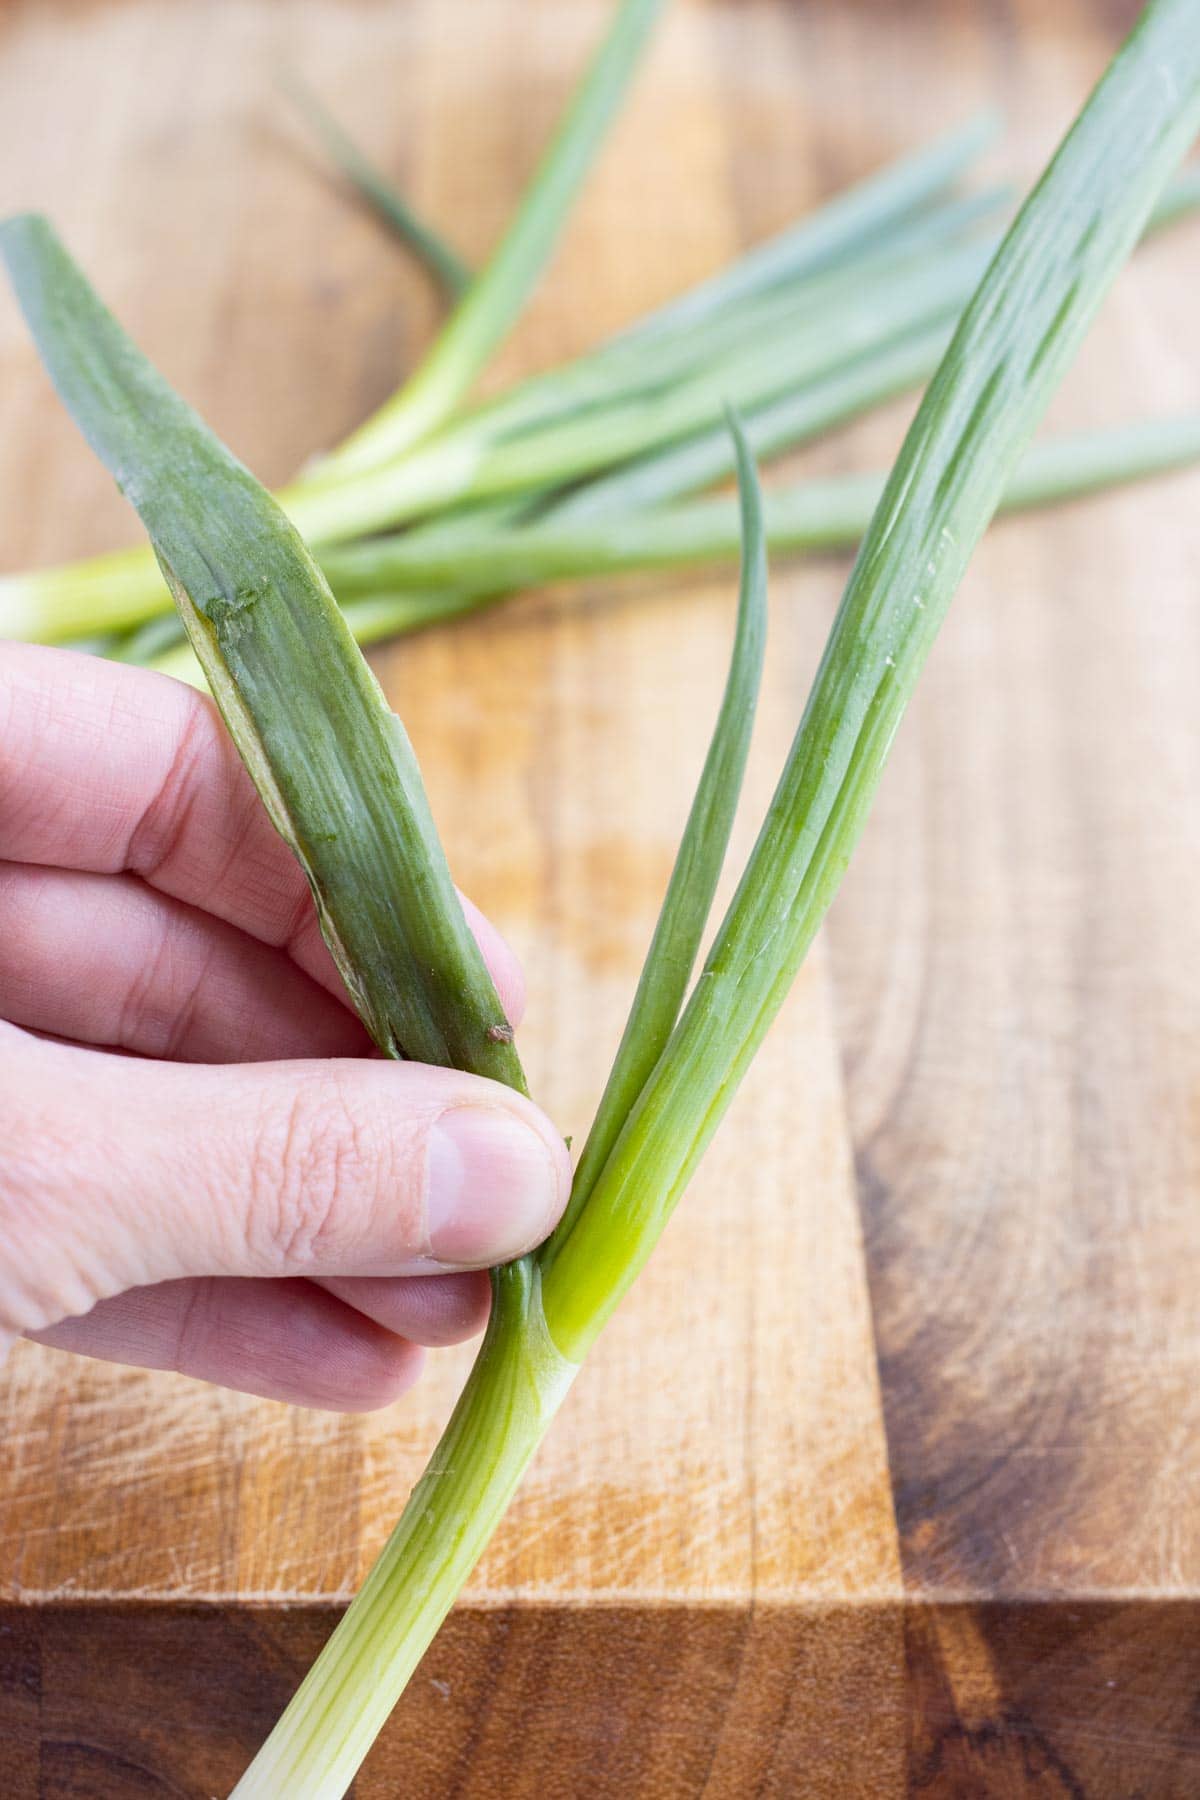 The outer leaves are taken off of the green onions.